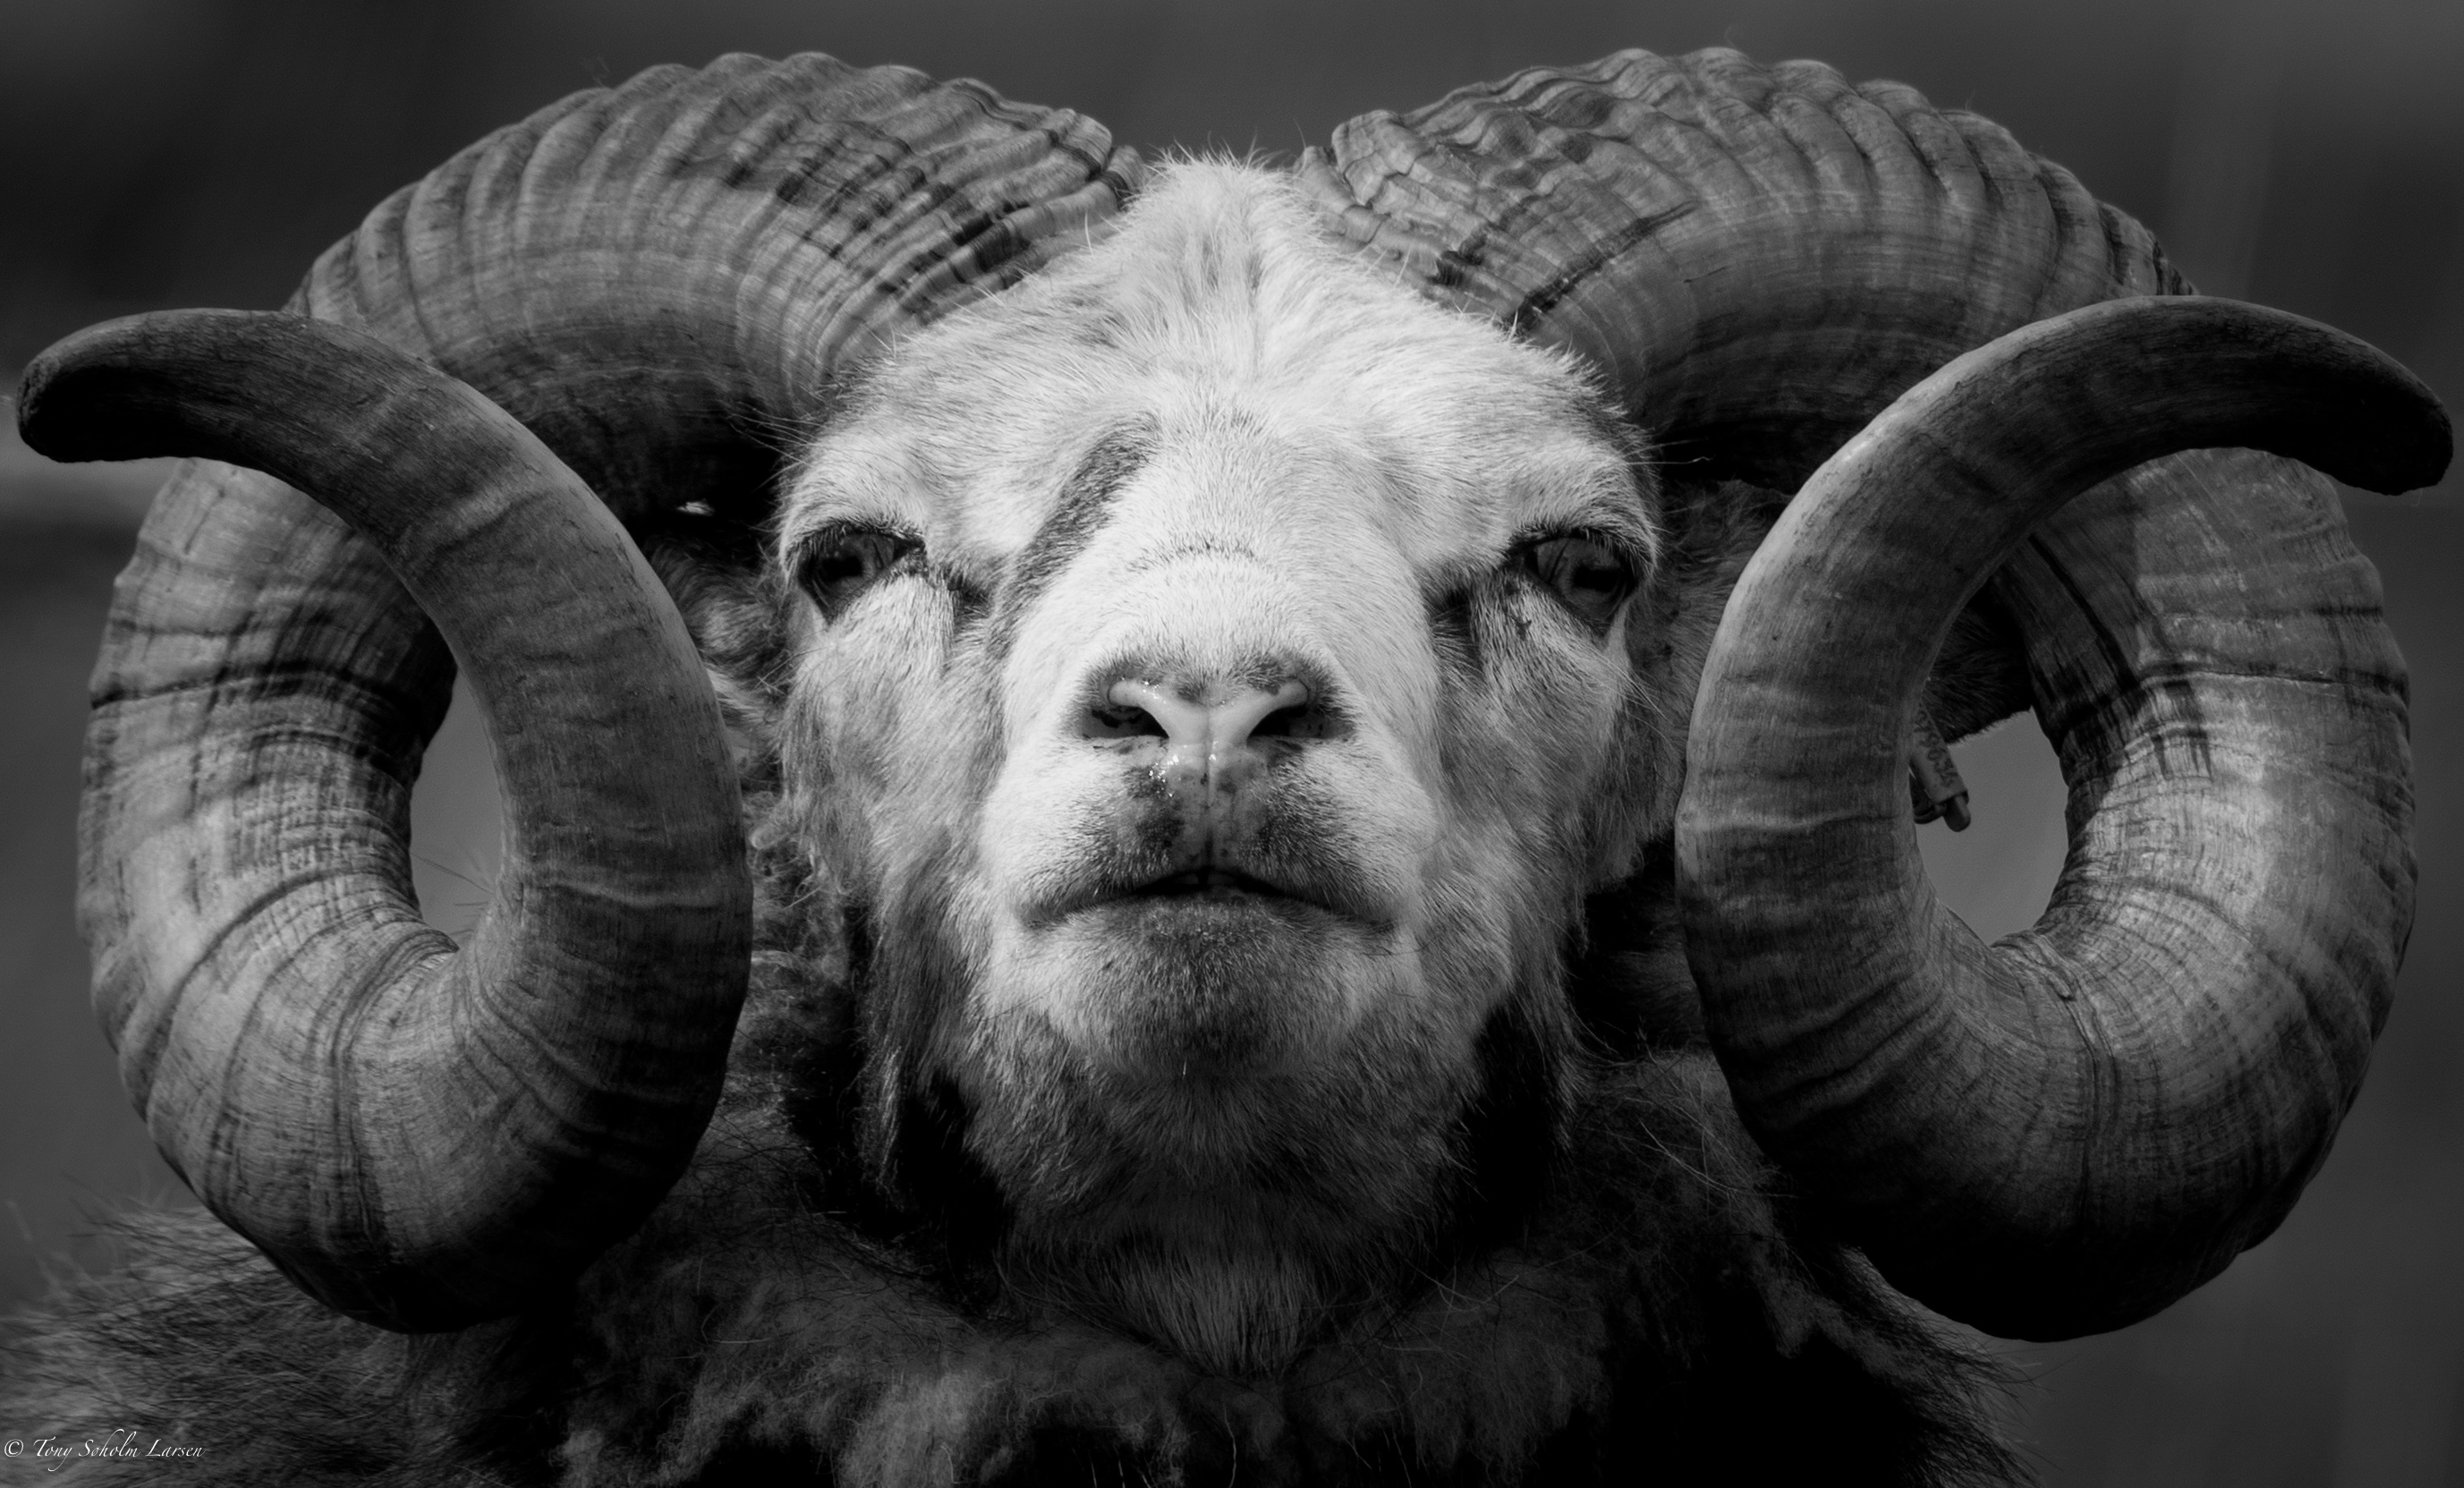 Wallpaper, horn, black and white, monochrome photography, sheep, snout, close up, wildlife, graphy, cow goat family 2754x1663